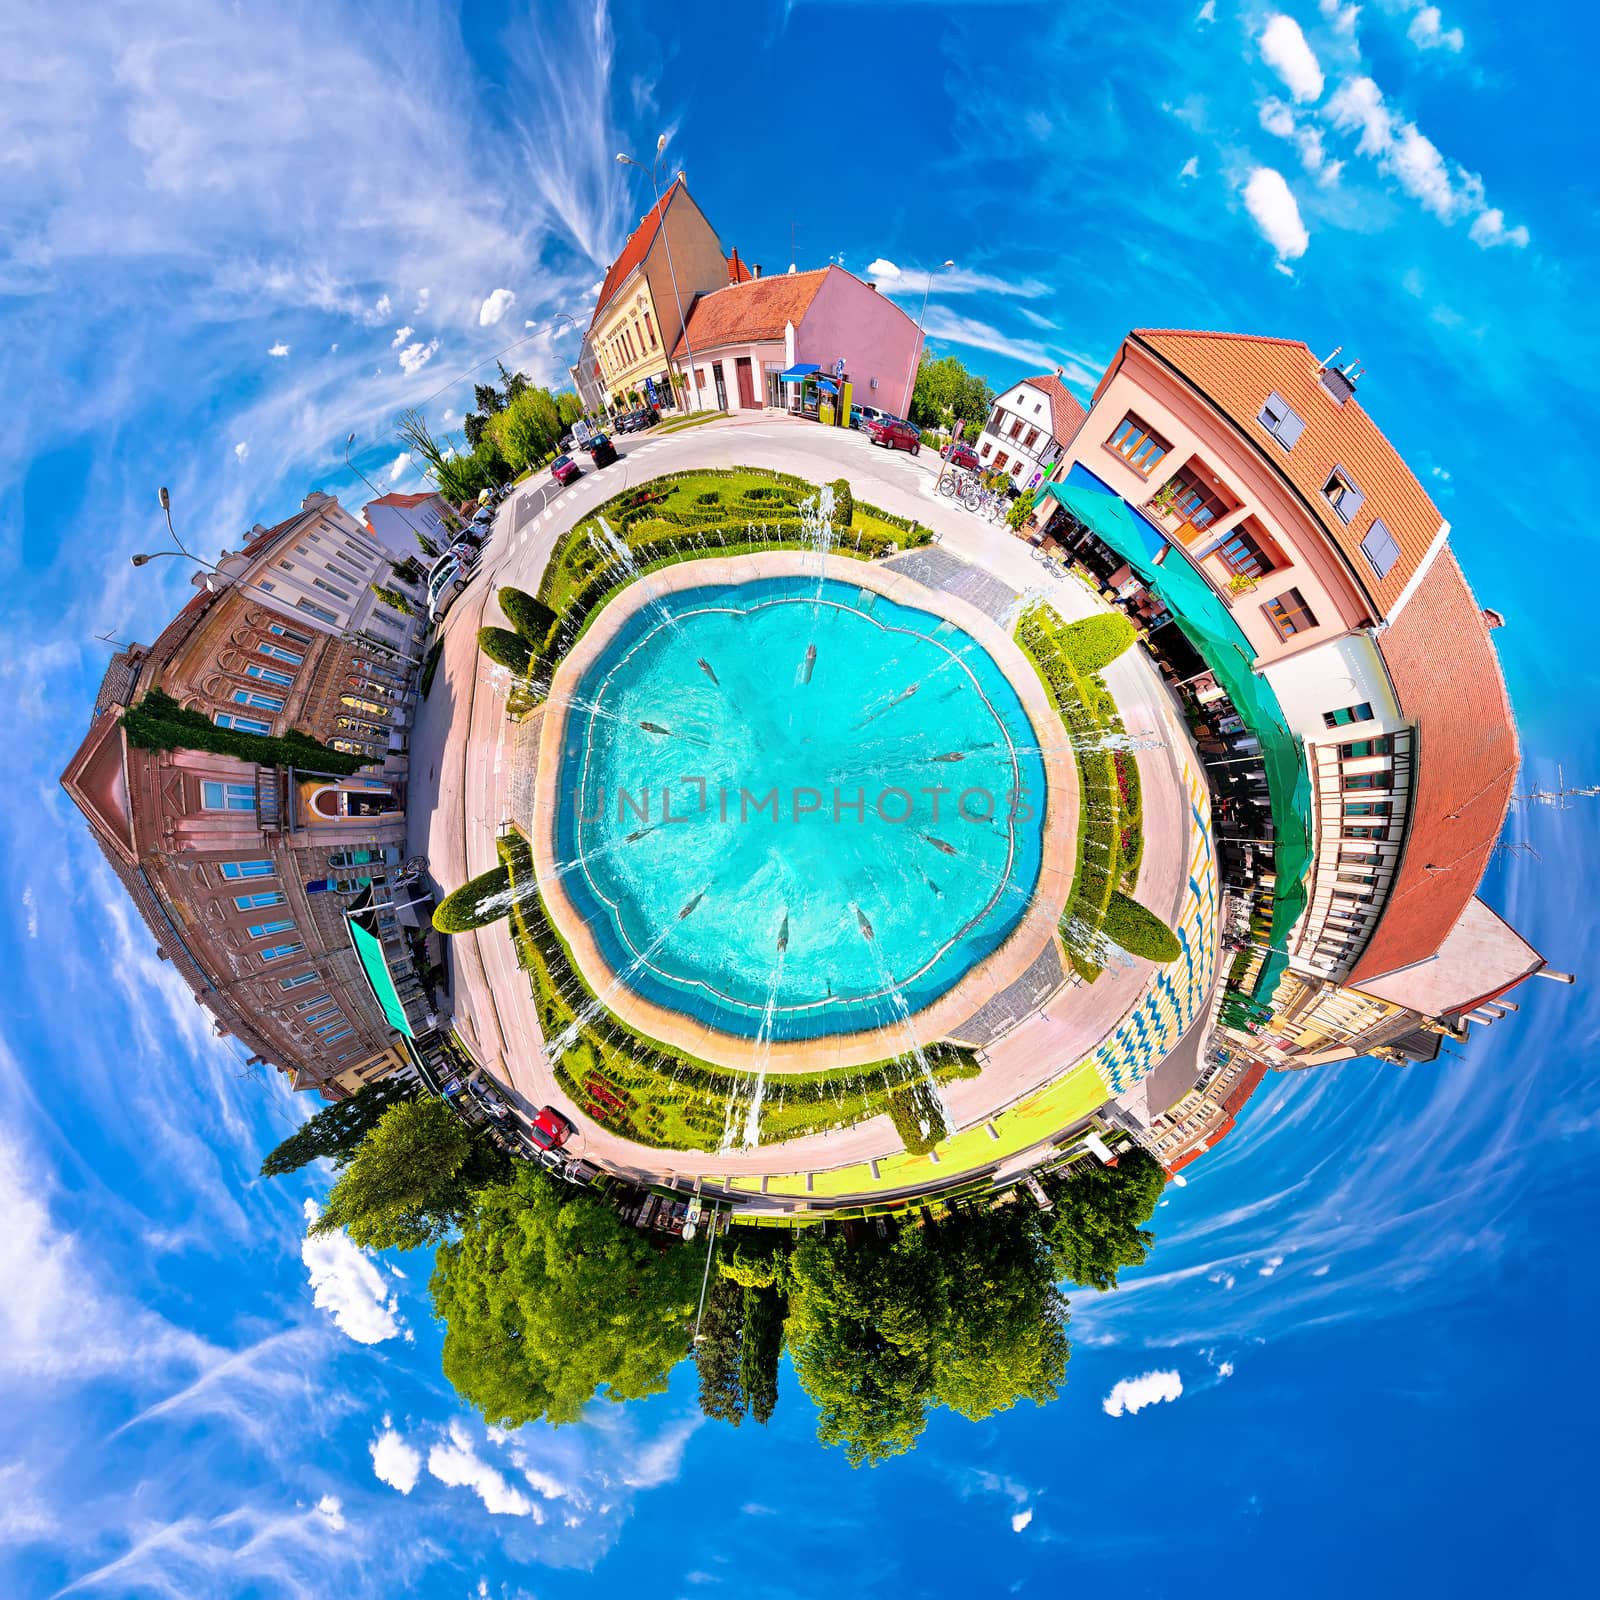 Town of Koprivnica fountain and square planet perspective panorama, Podravina region of Croatia